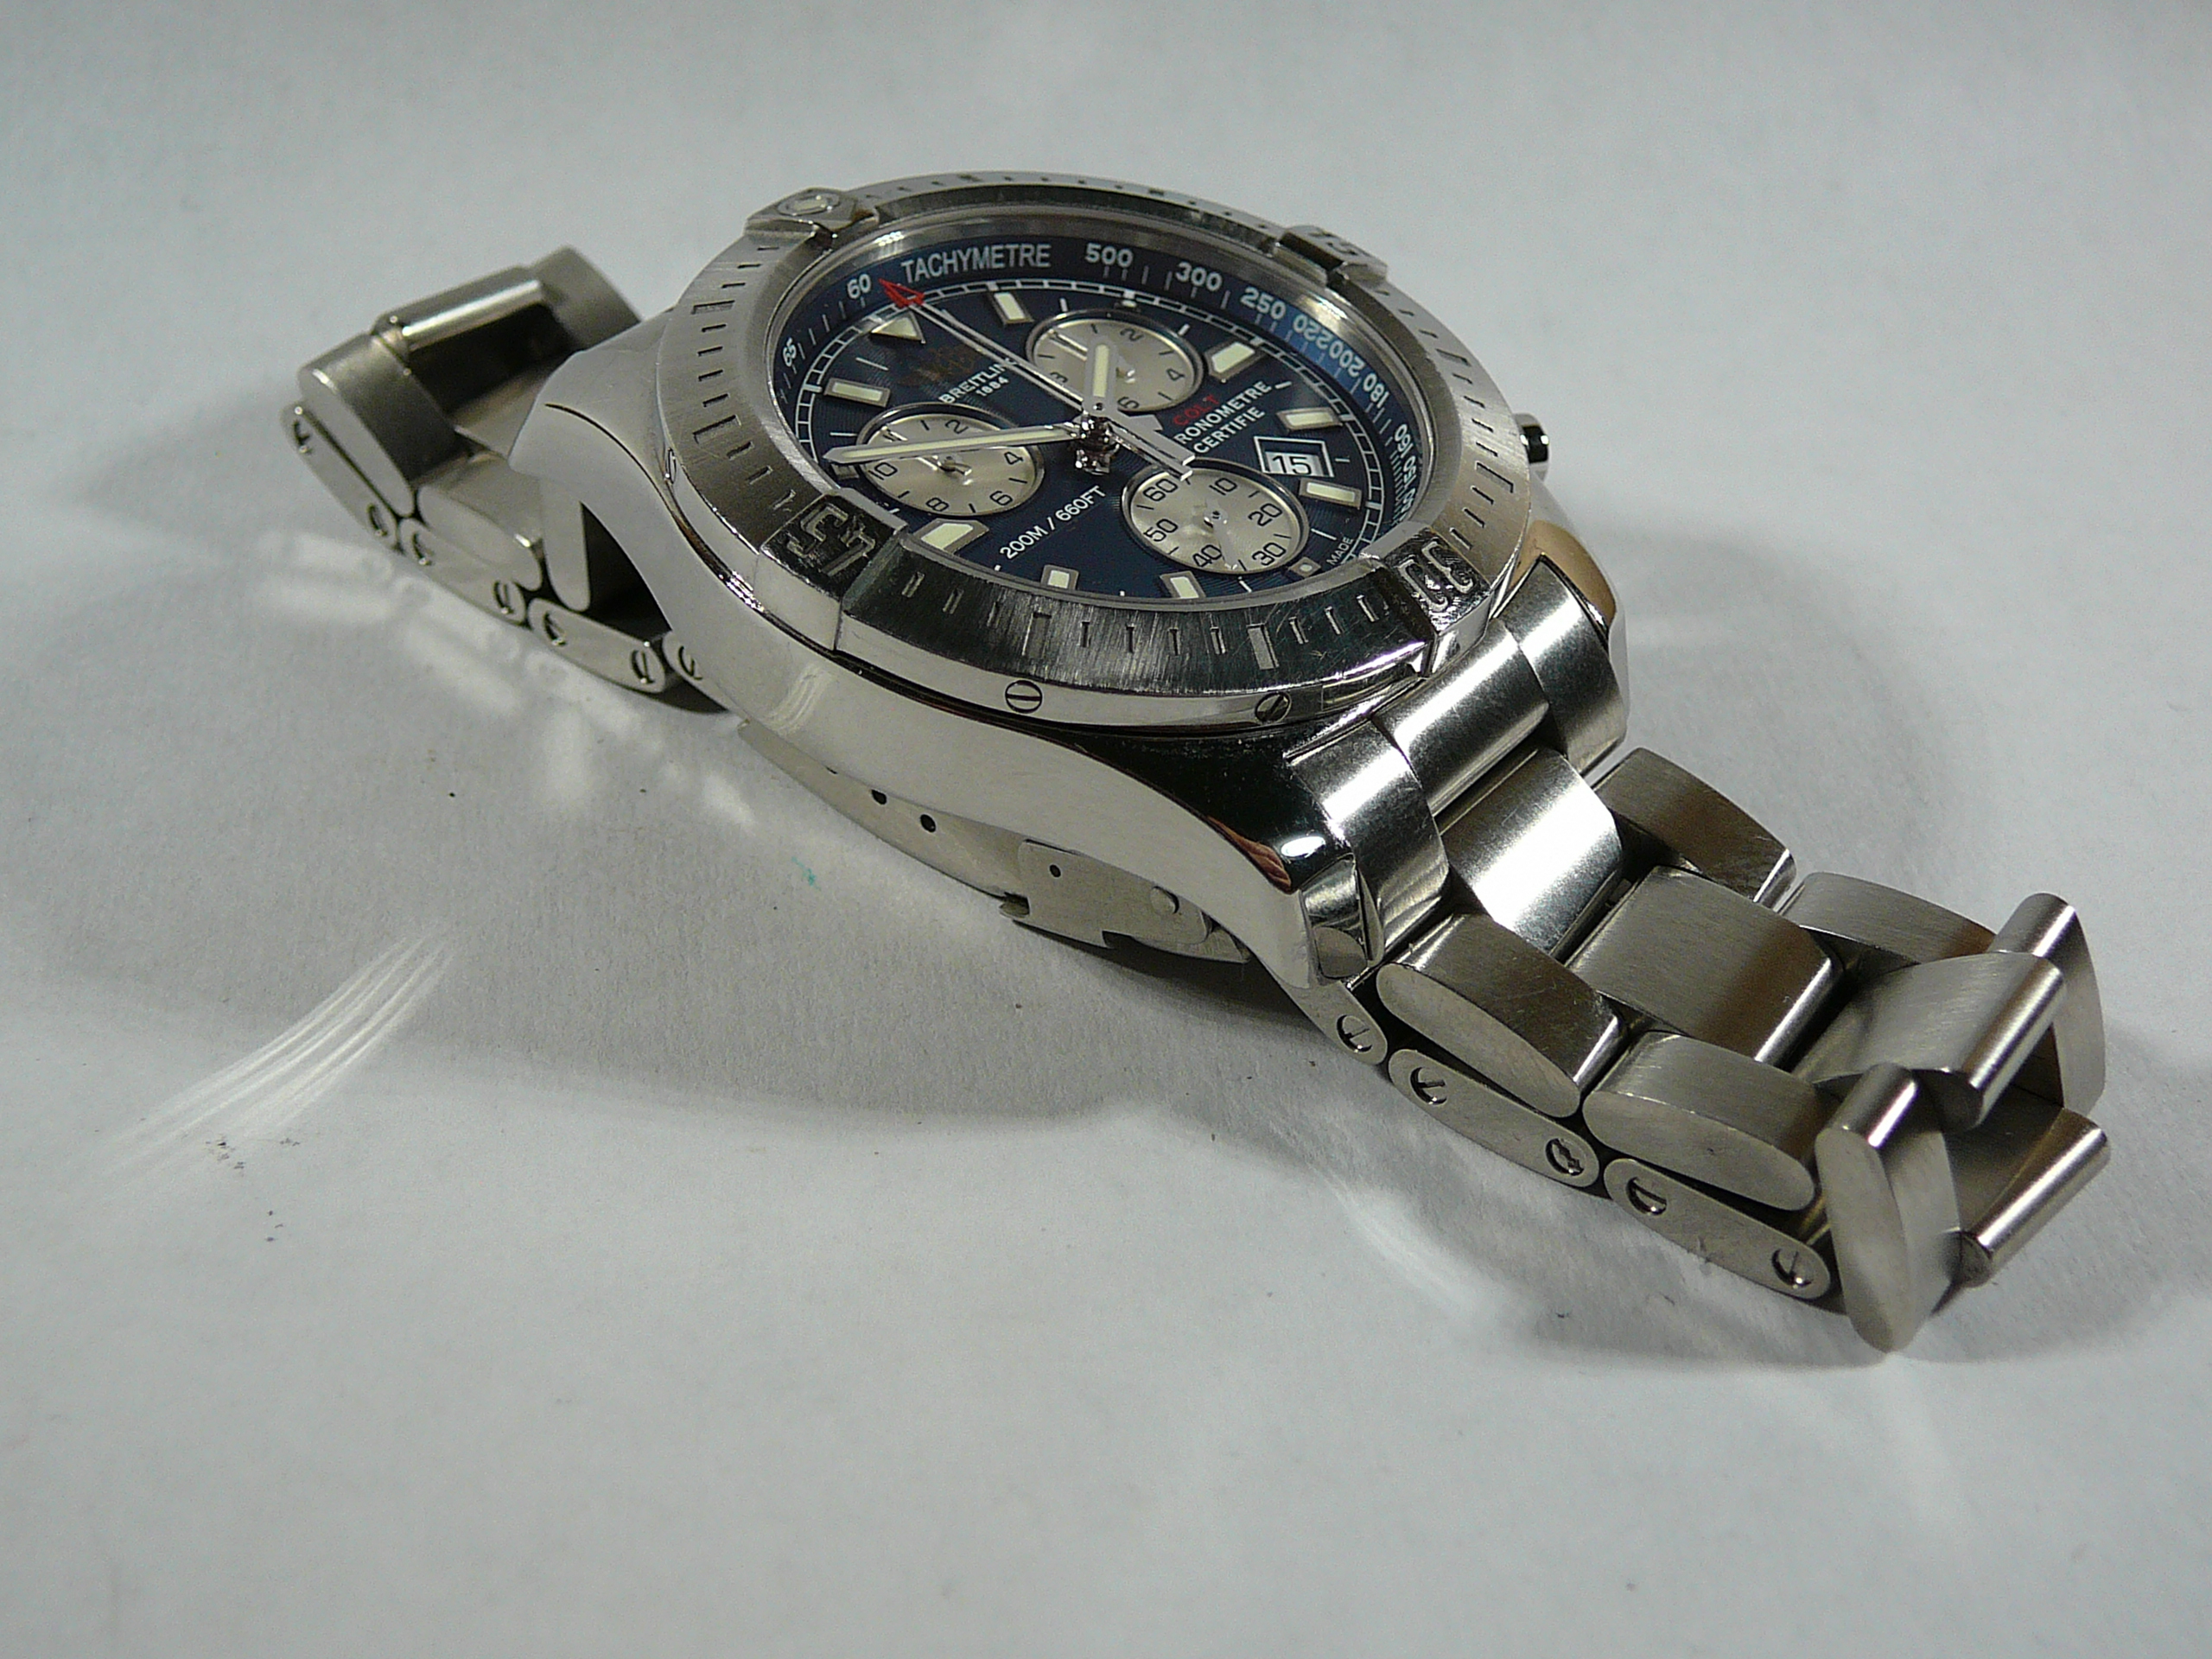 Gents Breitling Wristwatch - Image 4 of 6